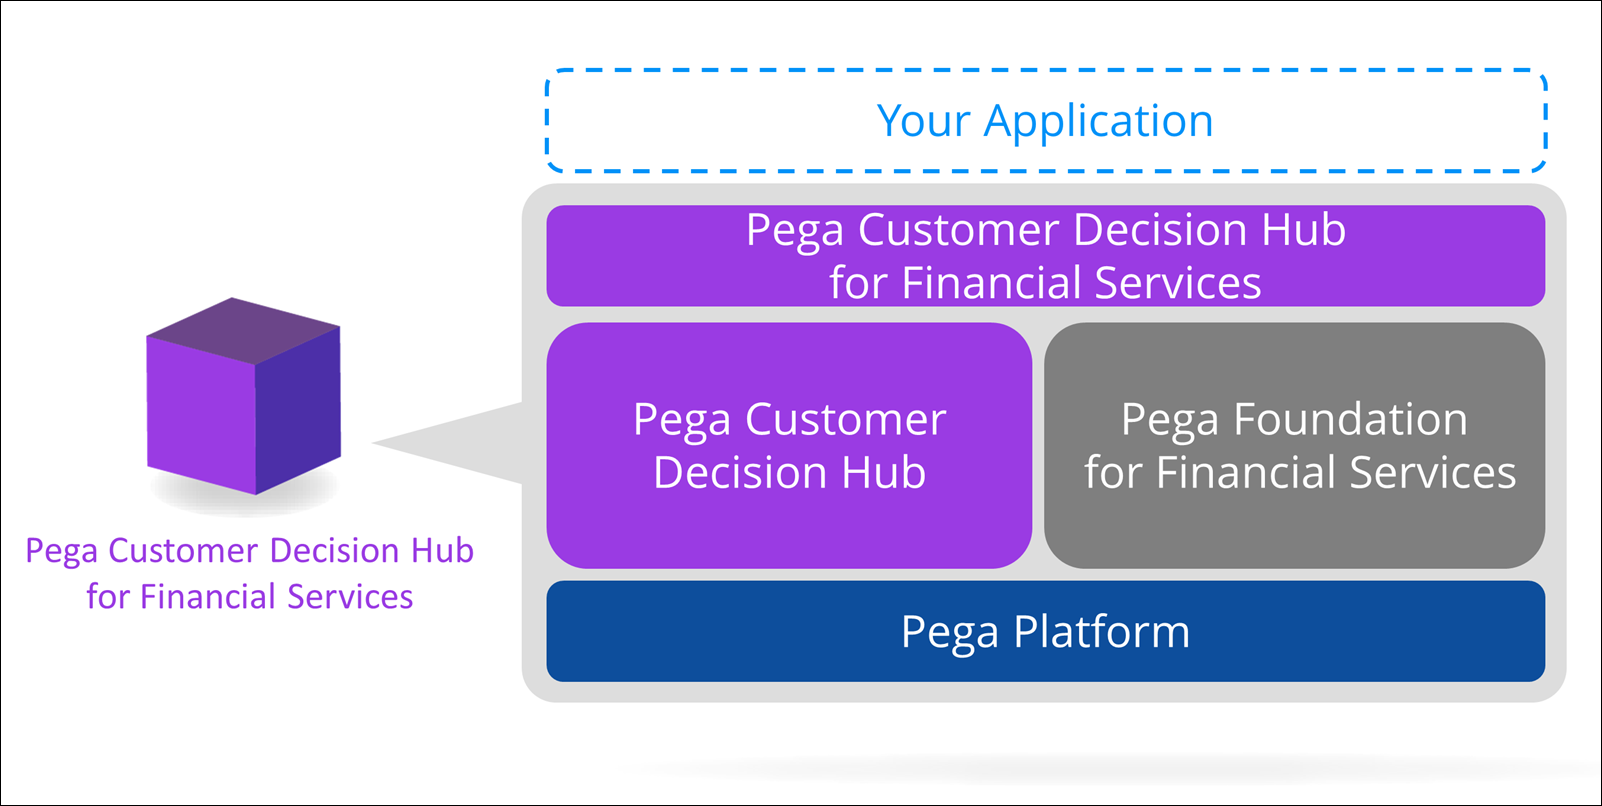 Bottom: Pega Platform. Second layer: CDH, Foundation for Financial Services. Above: CDH for Financial Services. Top: your app.